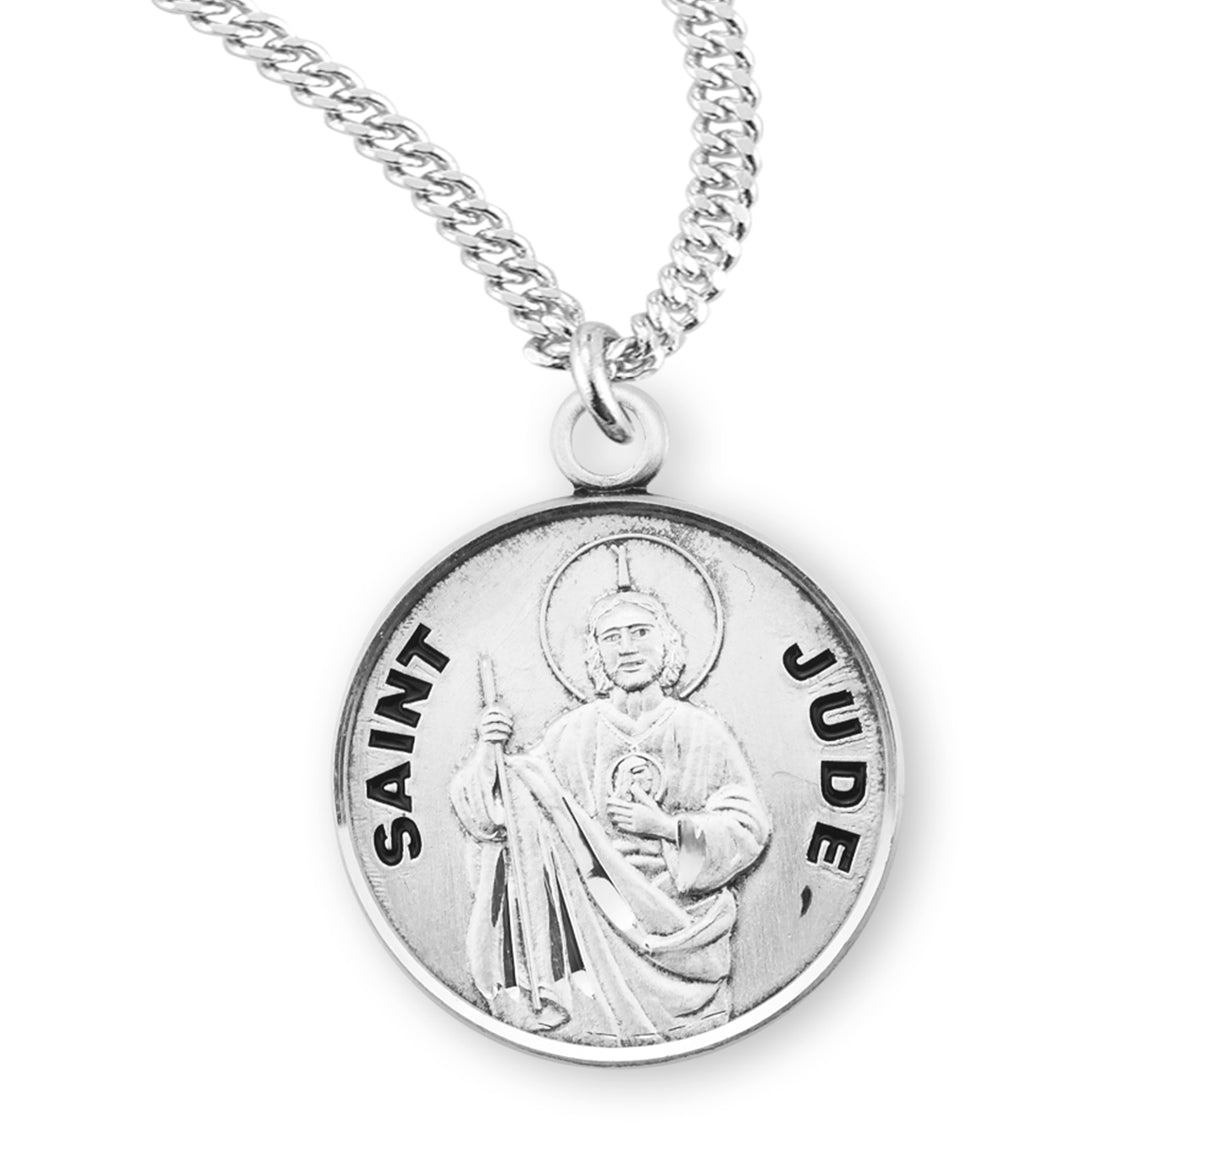 Patron Saint Jude Round Sterling Silver Medal